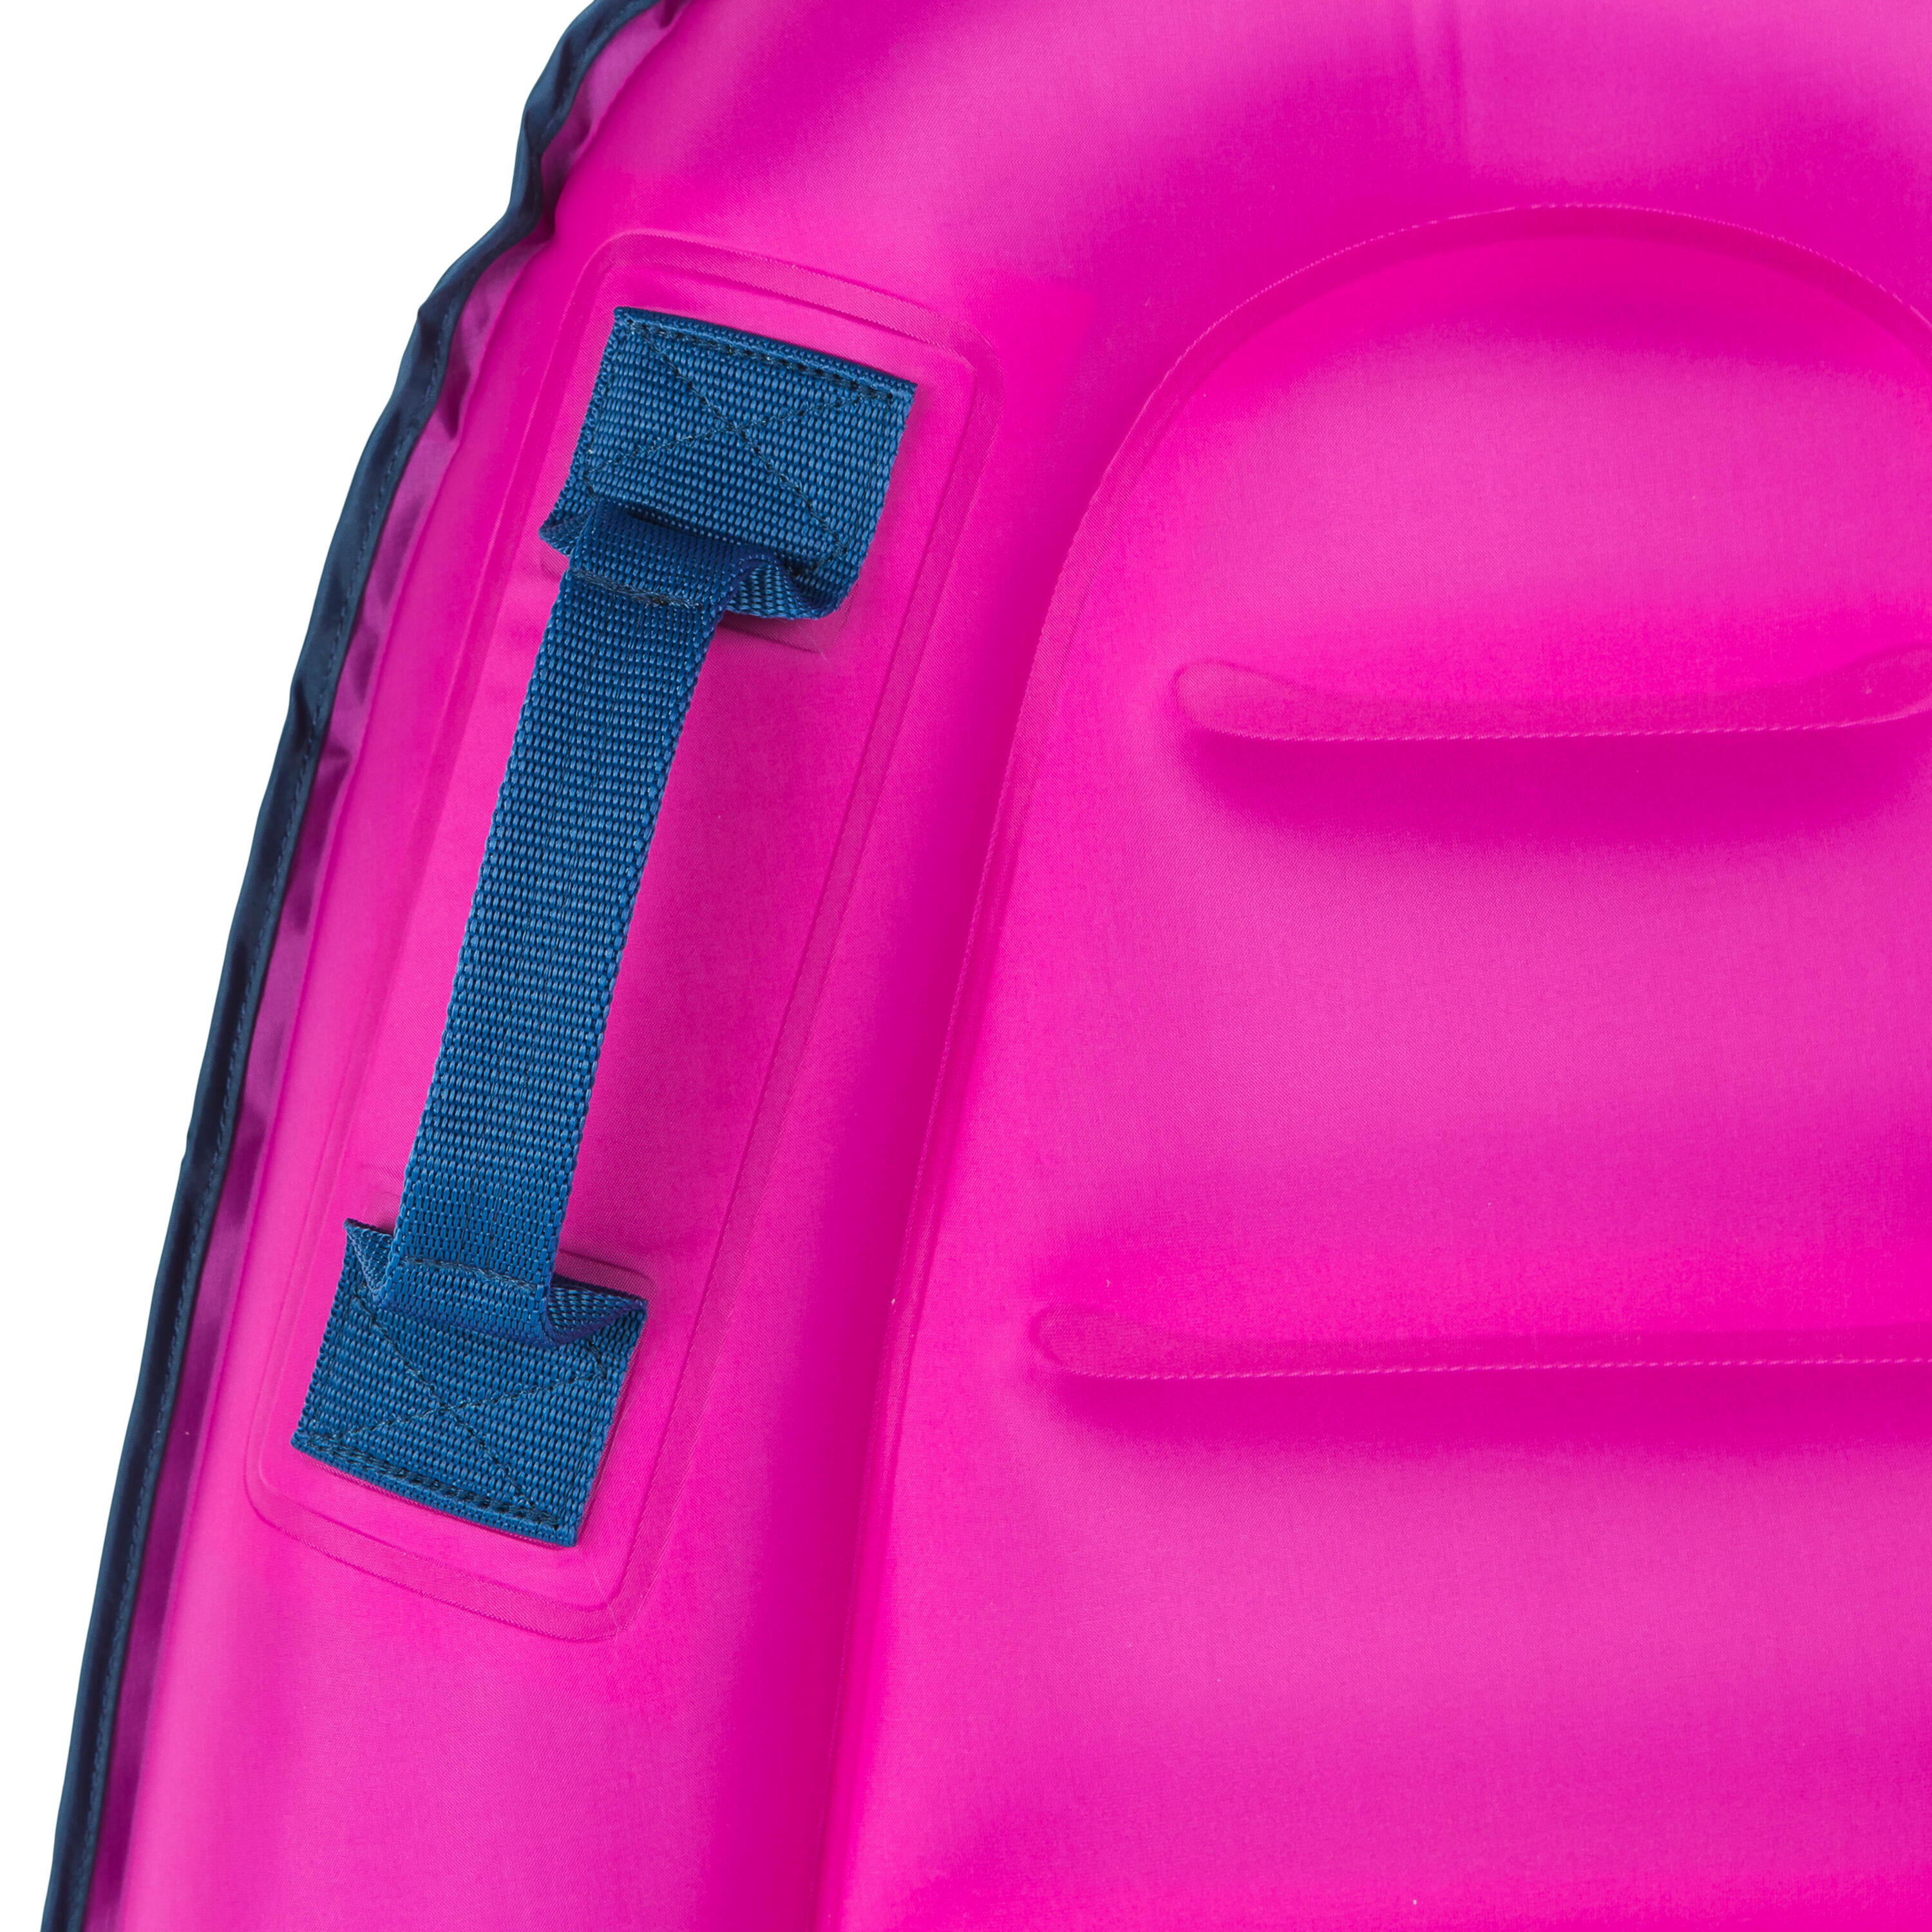 Kid's inflatable bodyboard for 4-8 year-olds (15-25 kg) - pink 5/12